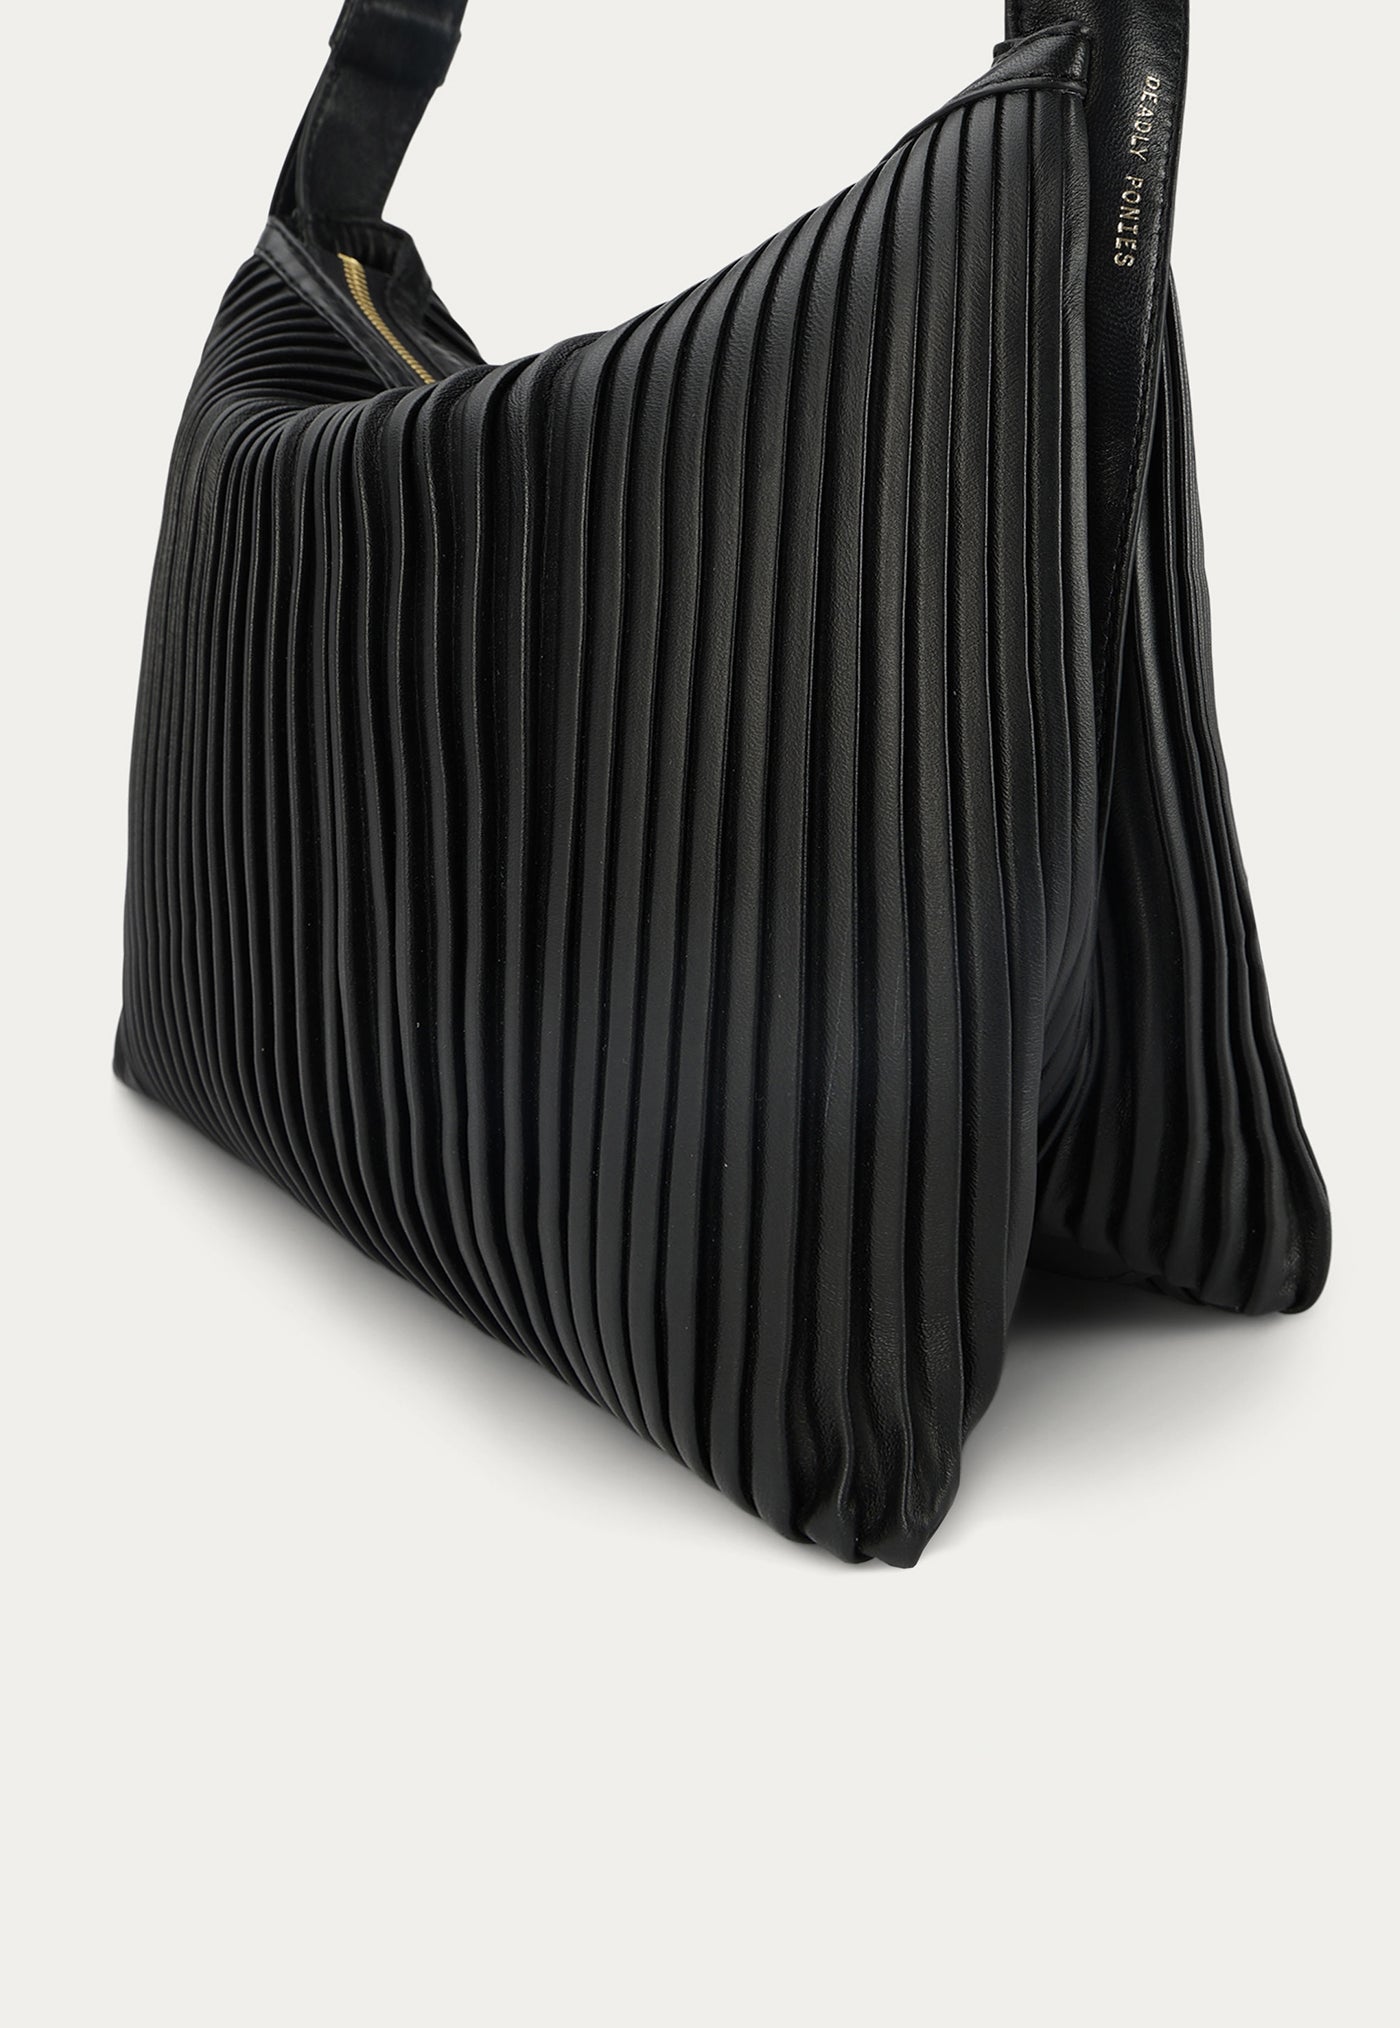 Mr Midimese - Black Pleated sold by Angel Divine